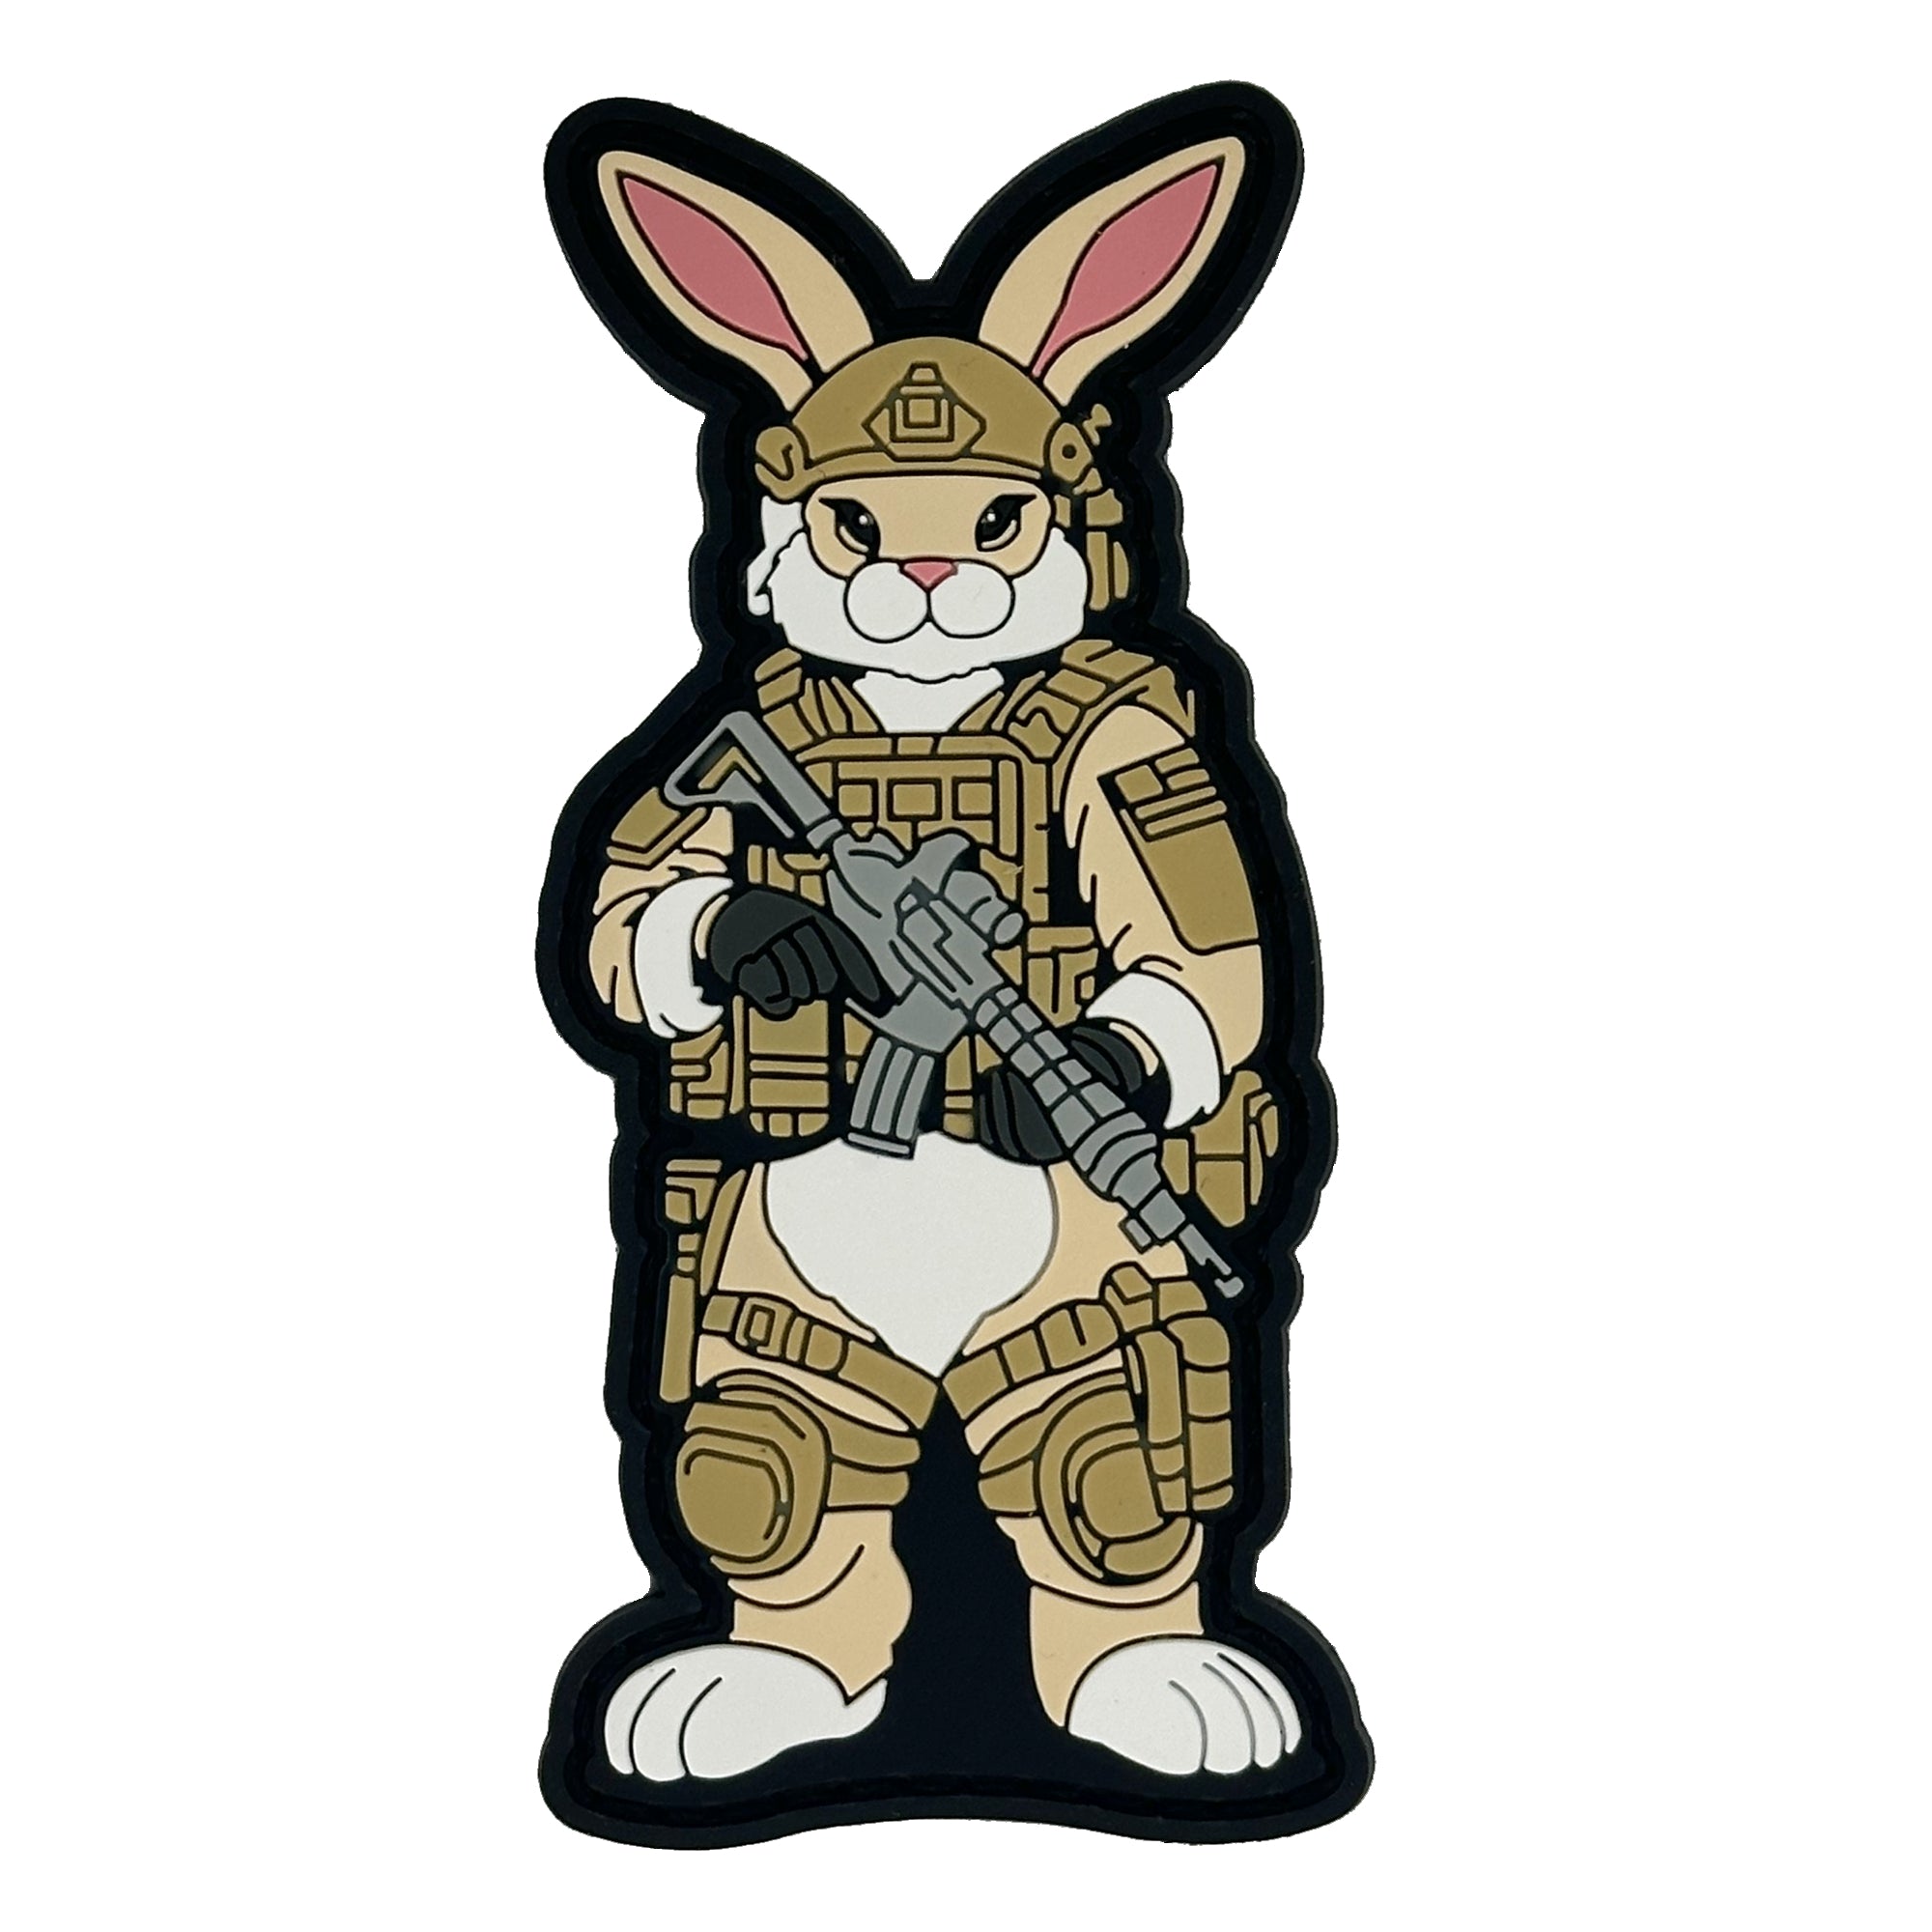 Pew Pew Peter Tactical Easter Battle Bunny 4" PVC Patch - Bad Bunny Collection